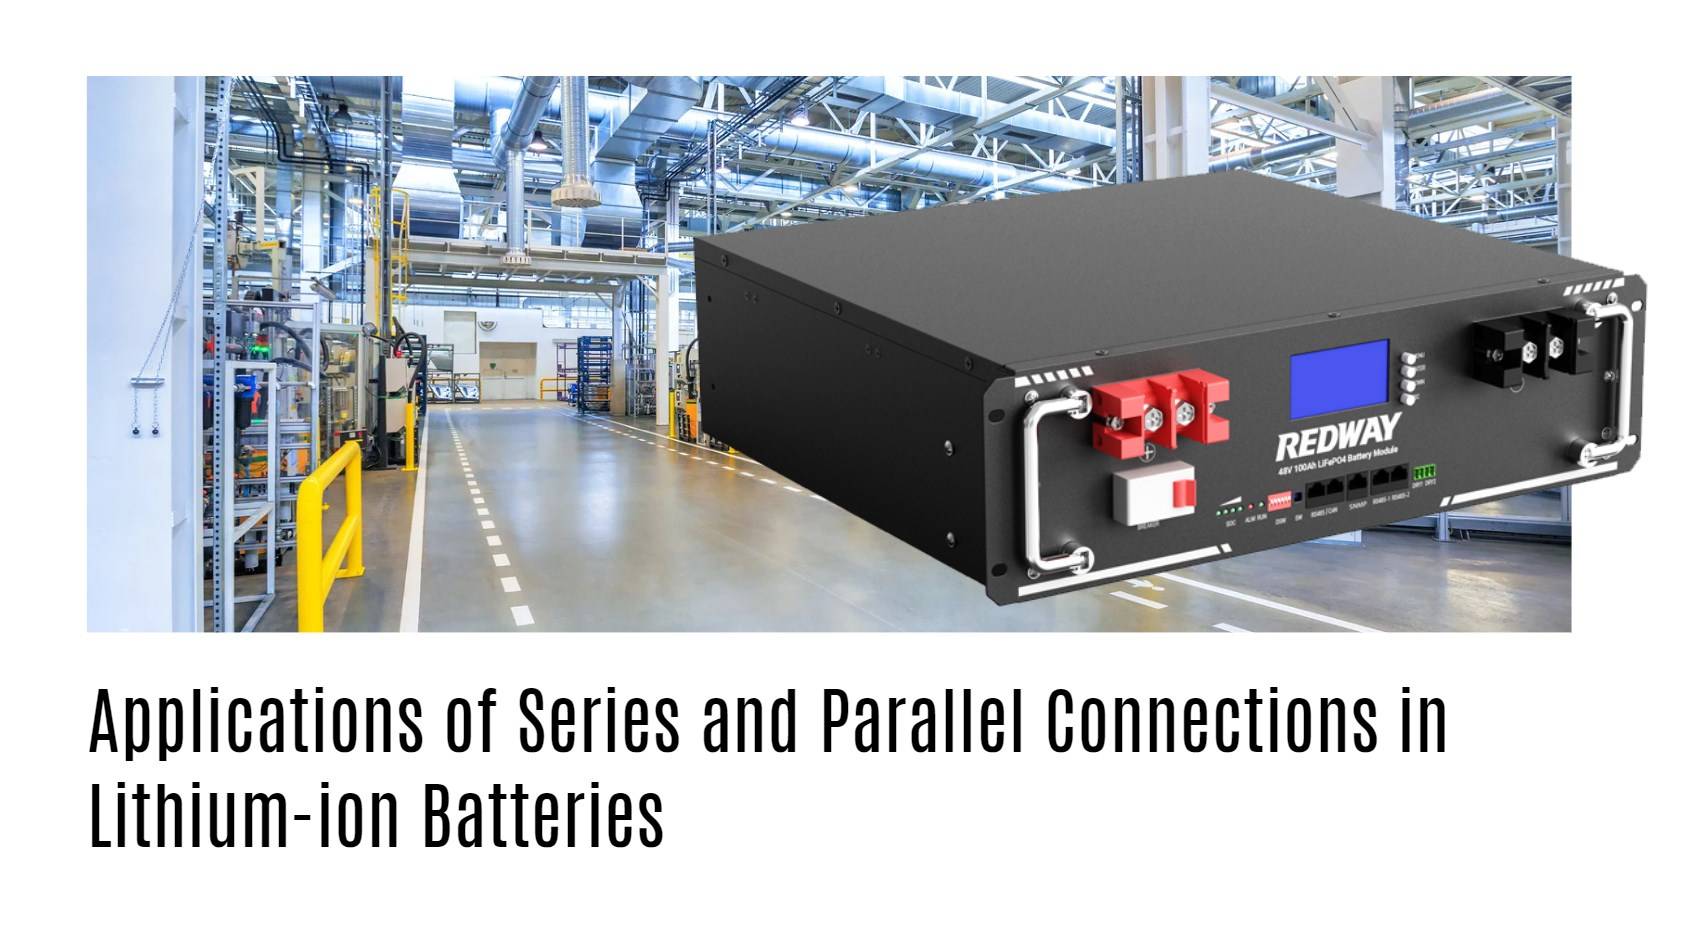 Applications of Series and Parallel Connections in Lithium-ion Batteries